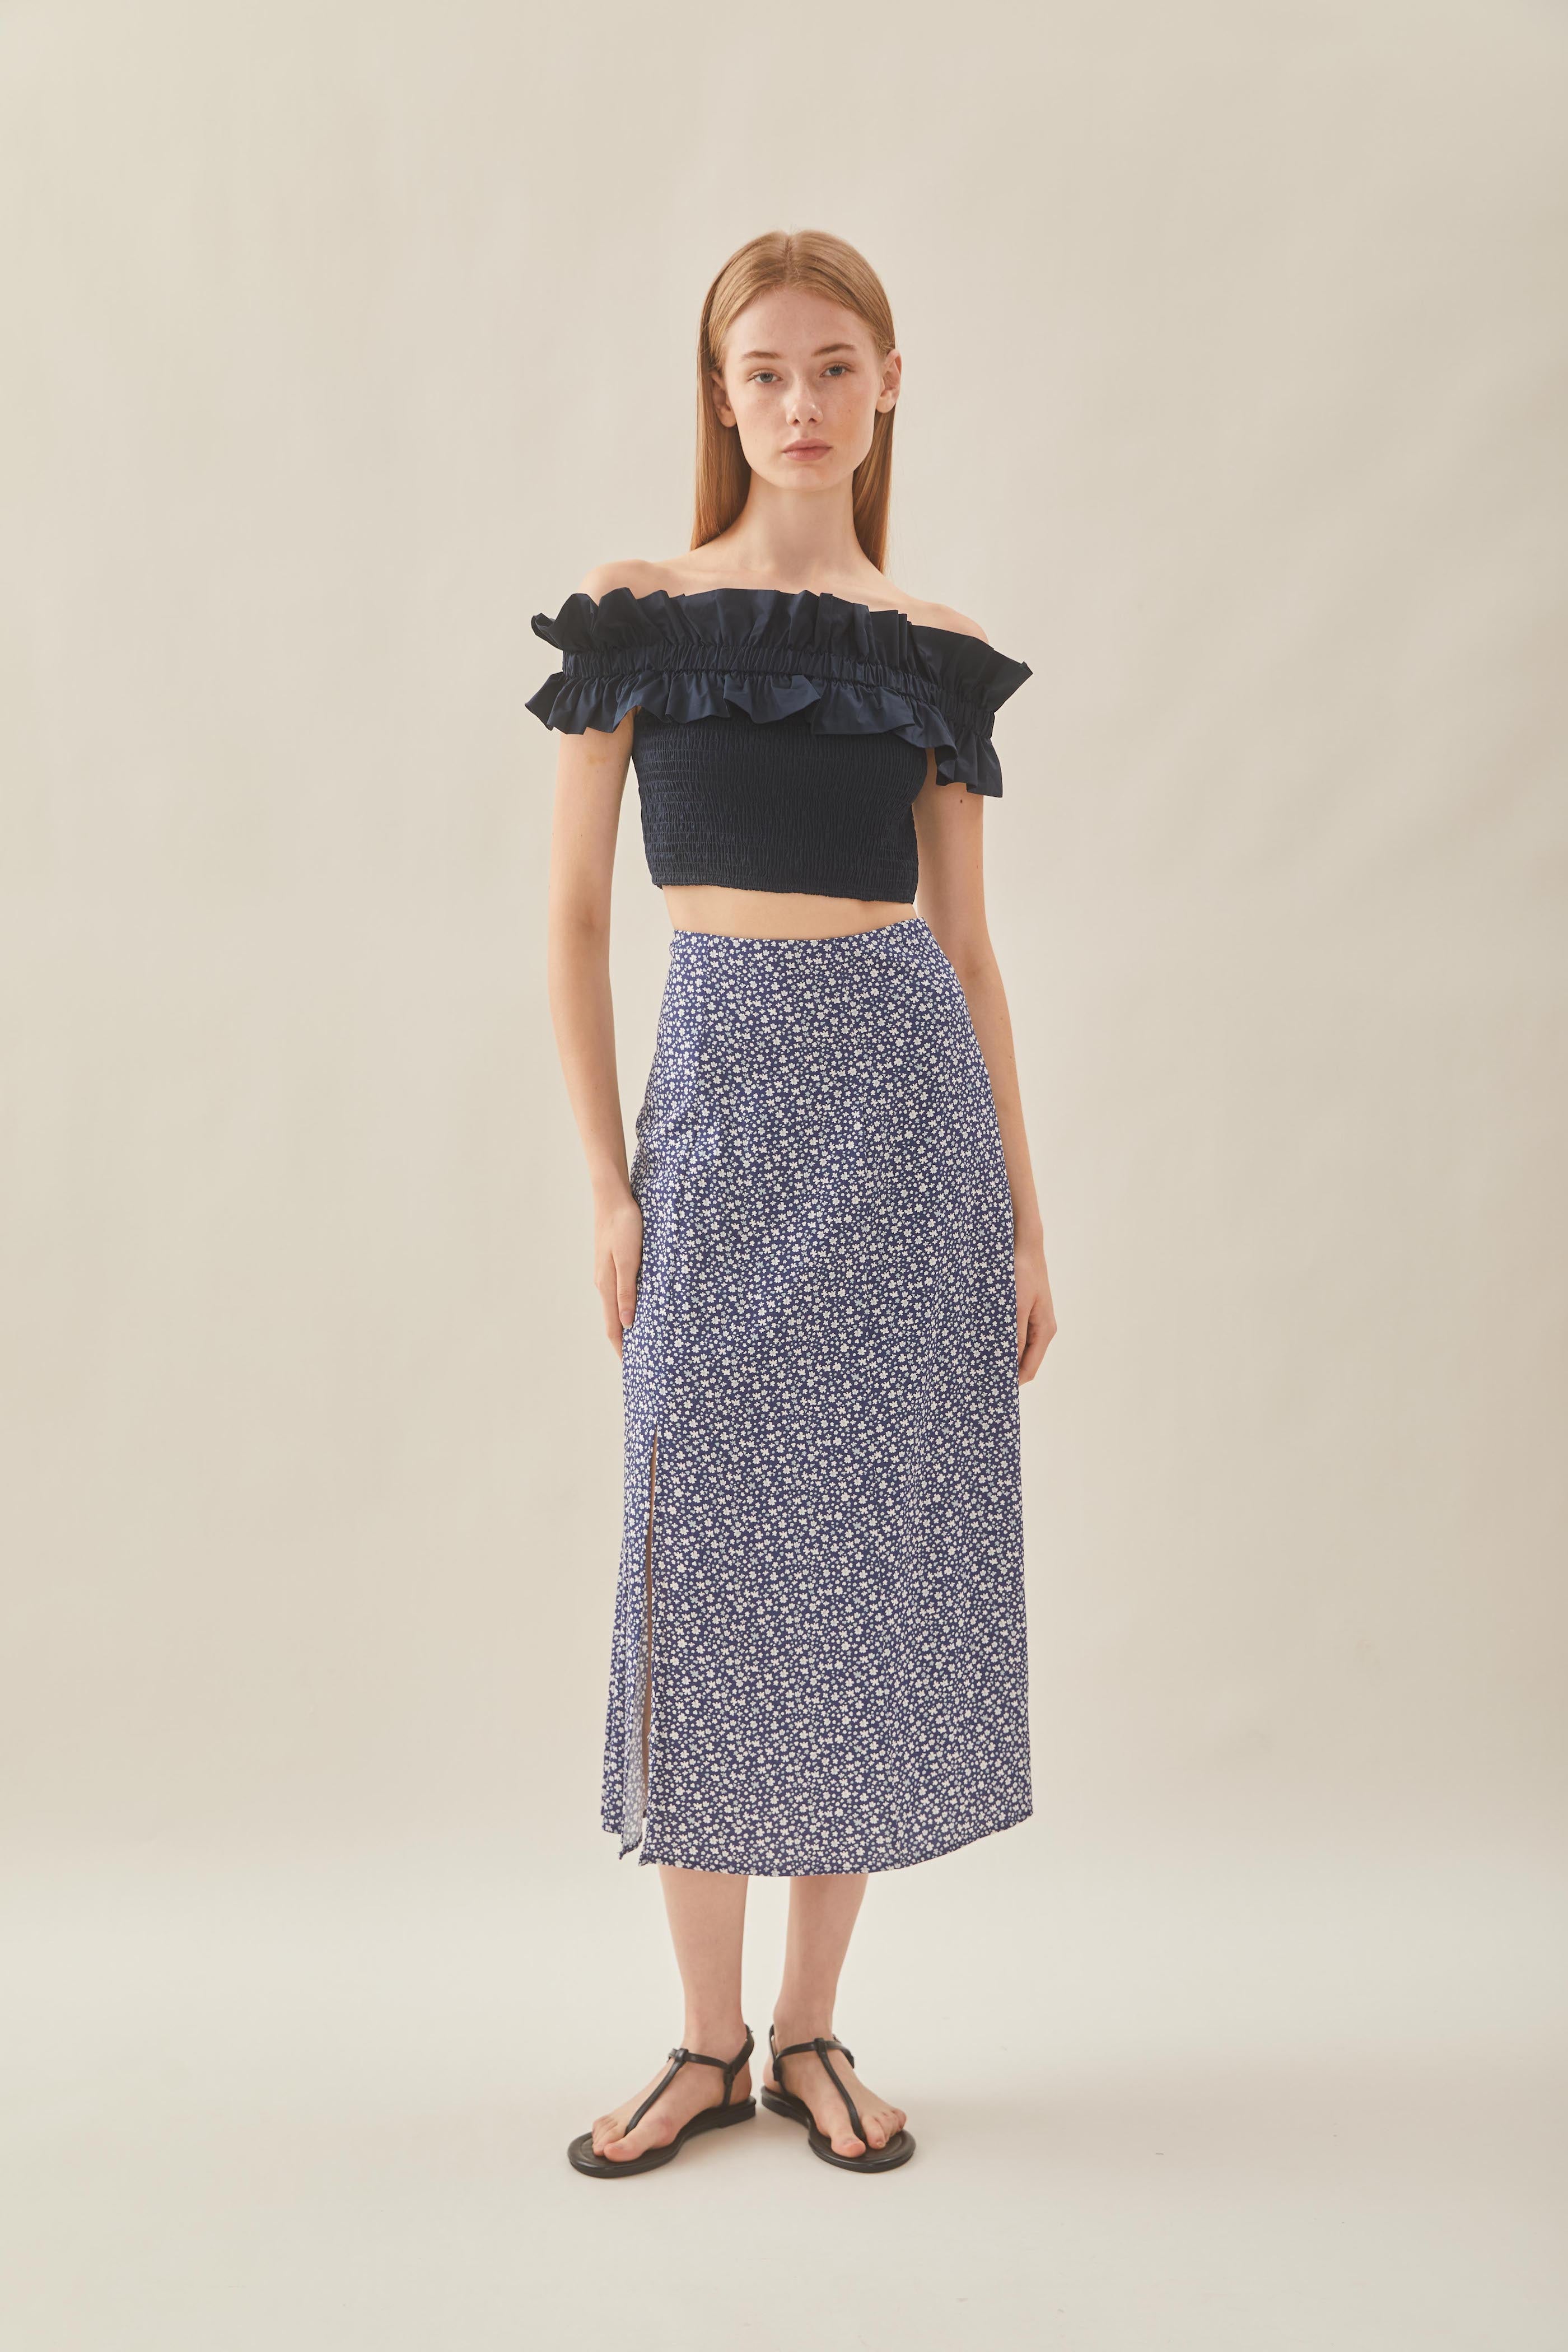 Cotton Blend Skirt with Slit in Moonlight Bloom